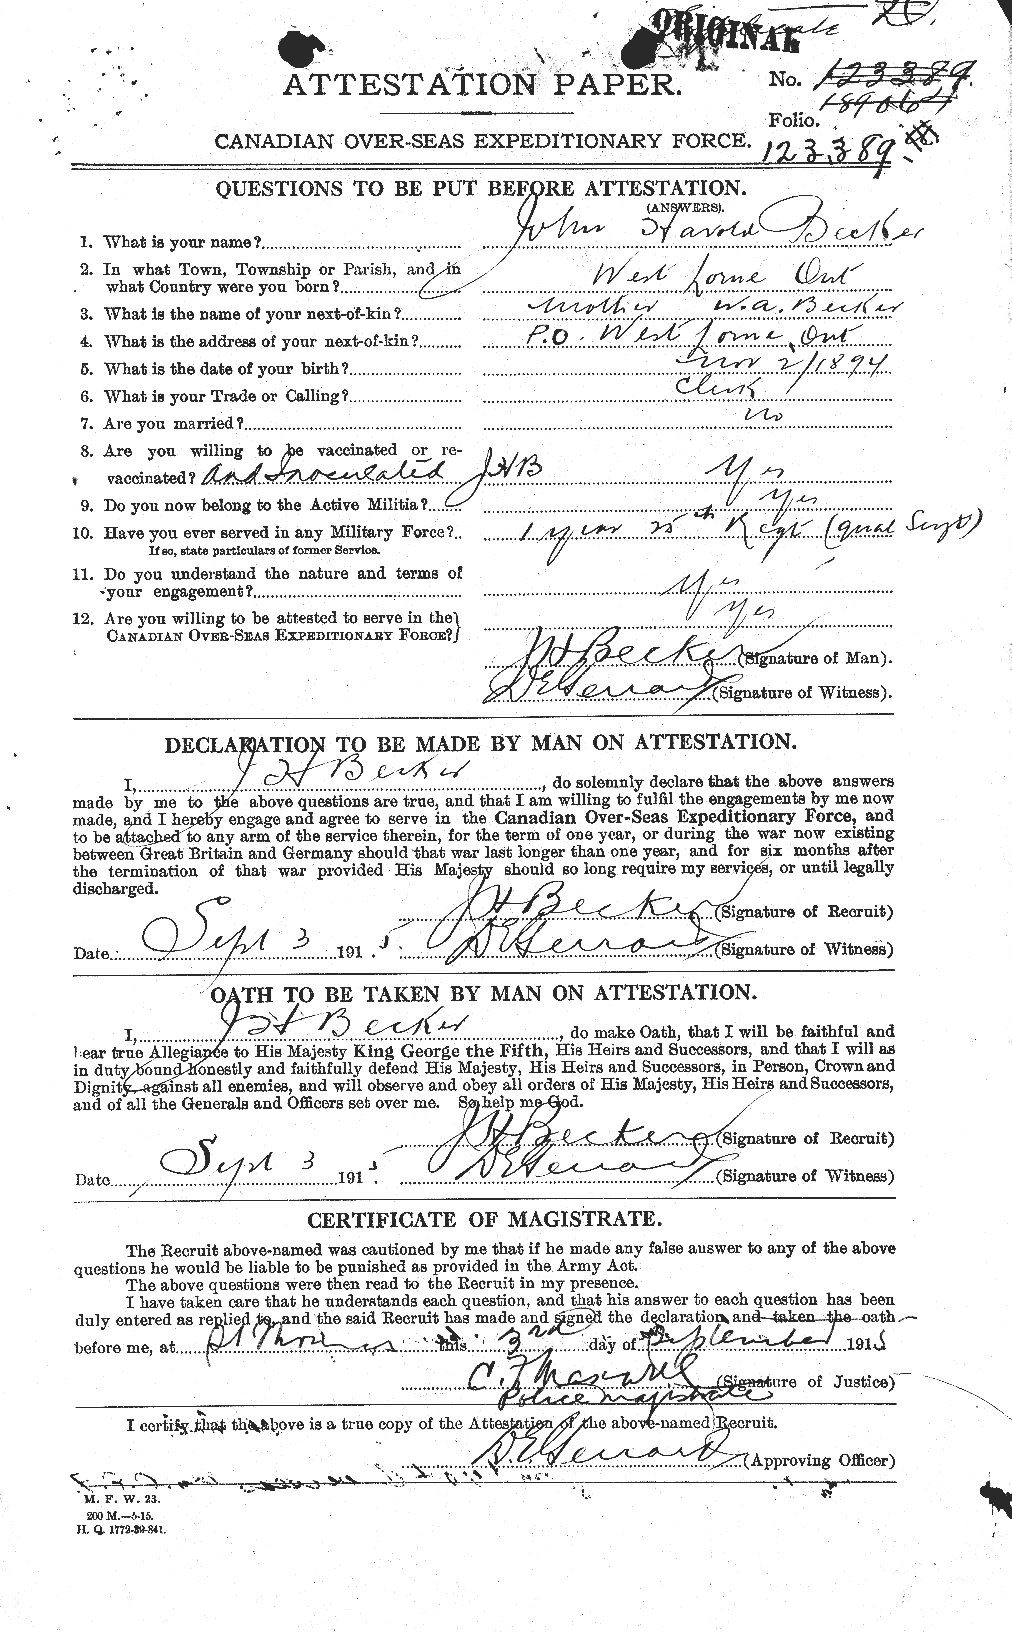 Personnel Records of the First World War - CEF 509803a